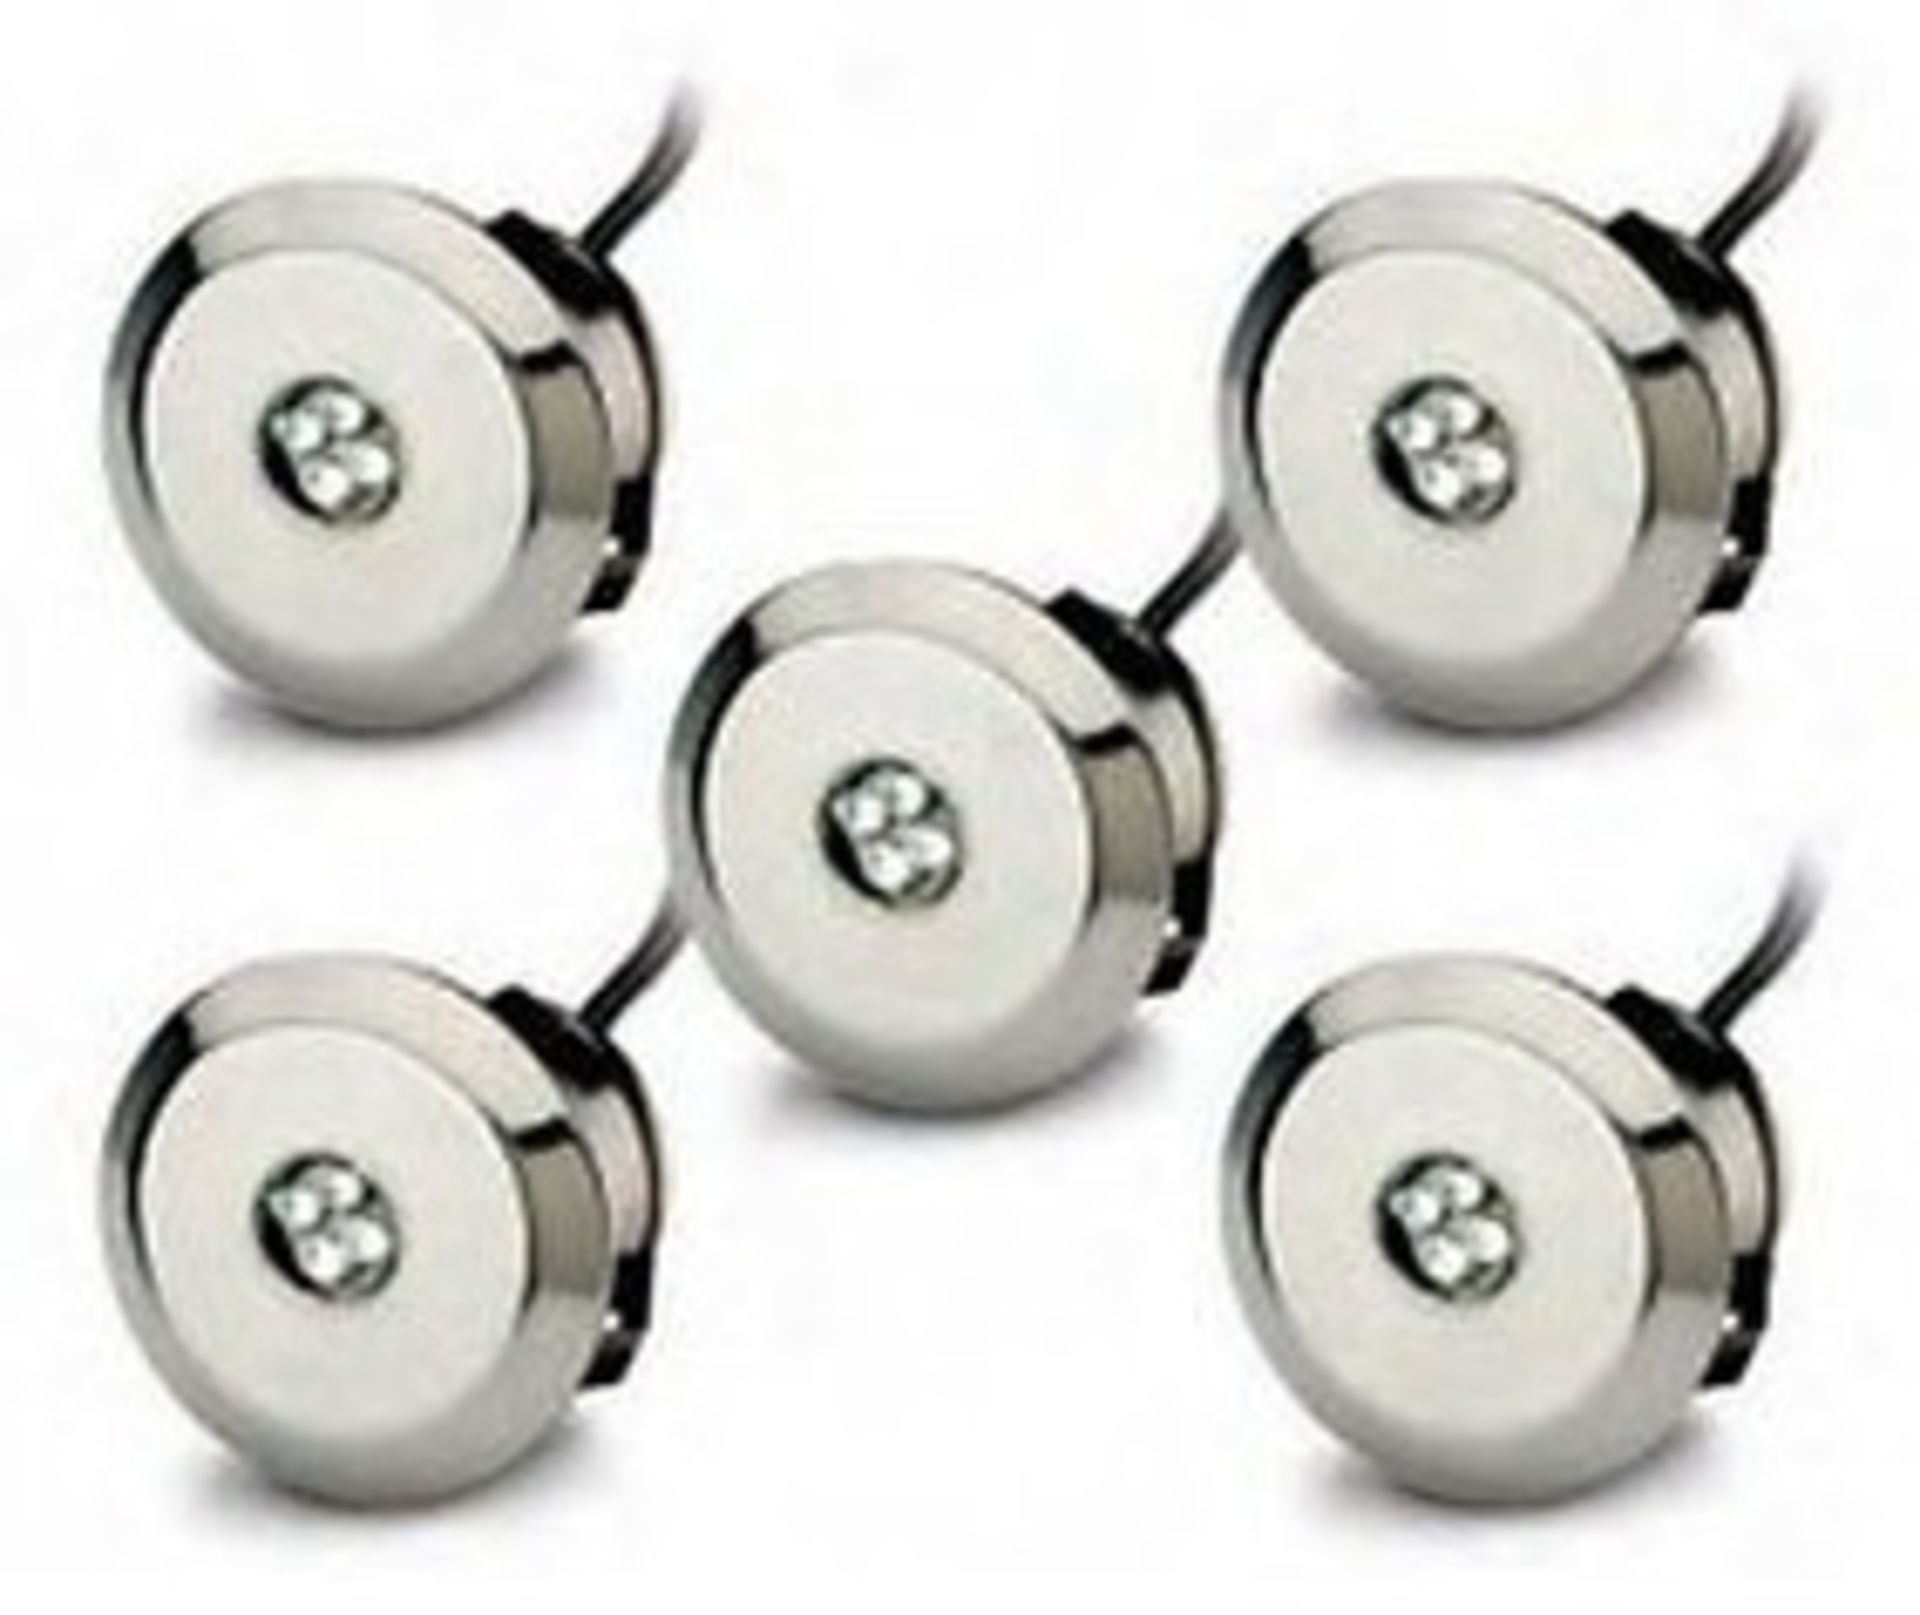 4 x JCC Lighting ELTINO Indoor Blue LED Floor or Wall Lighting Kits - Lot Includes Four Sets - Ideal - Image 3 of 5